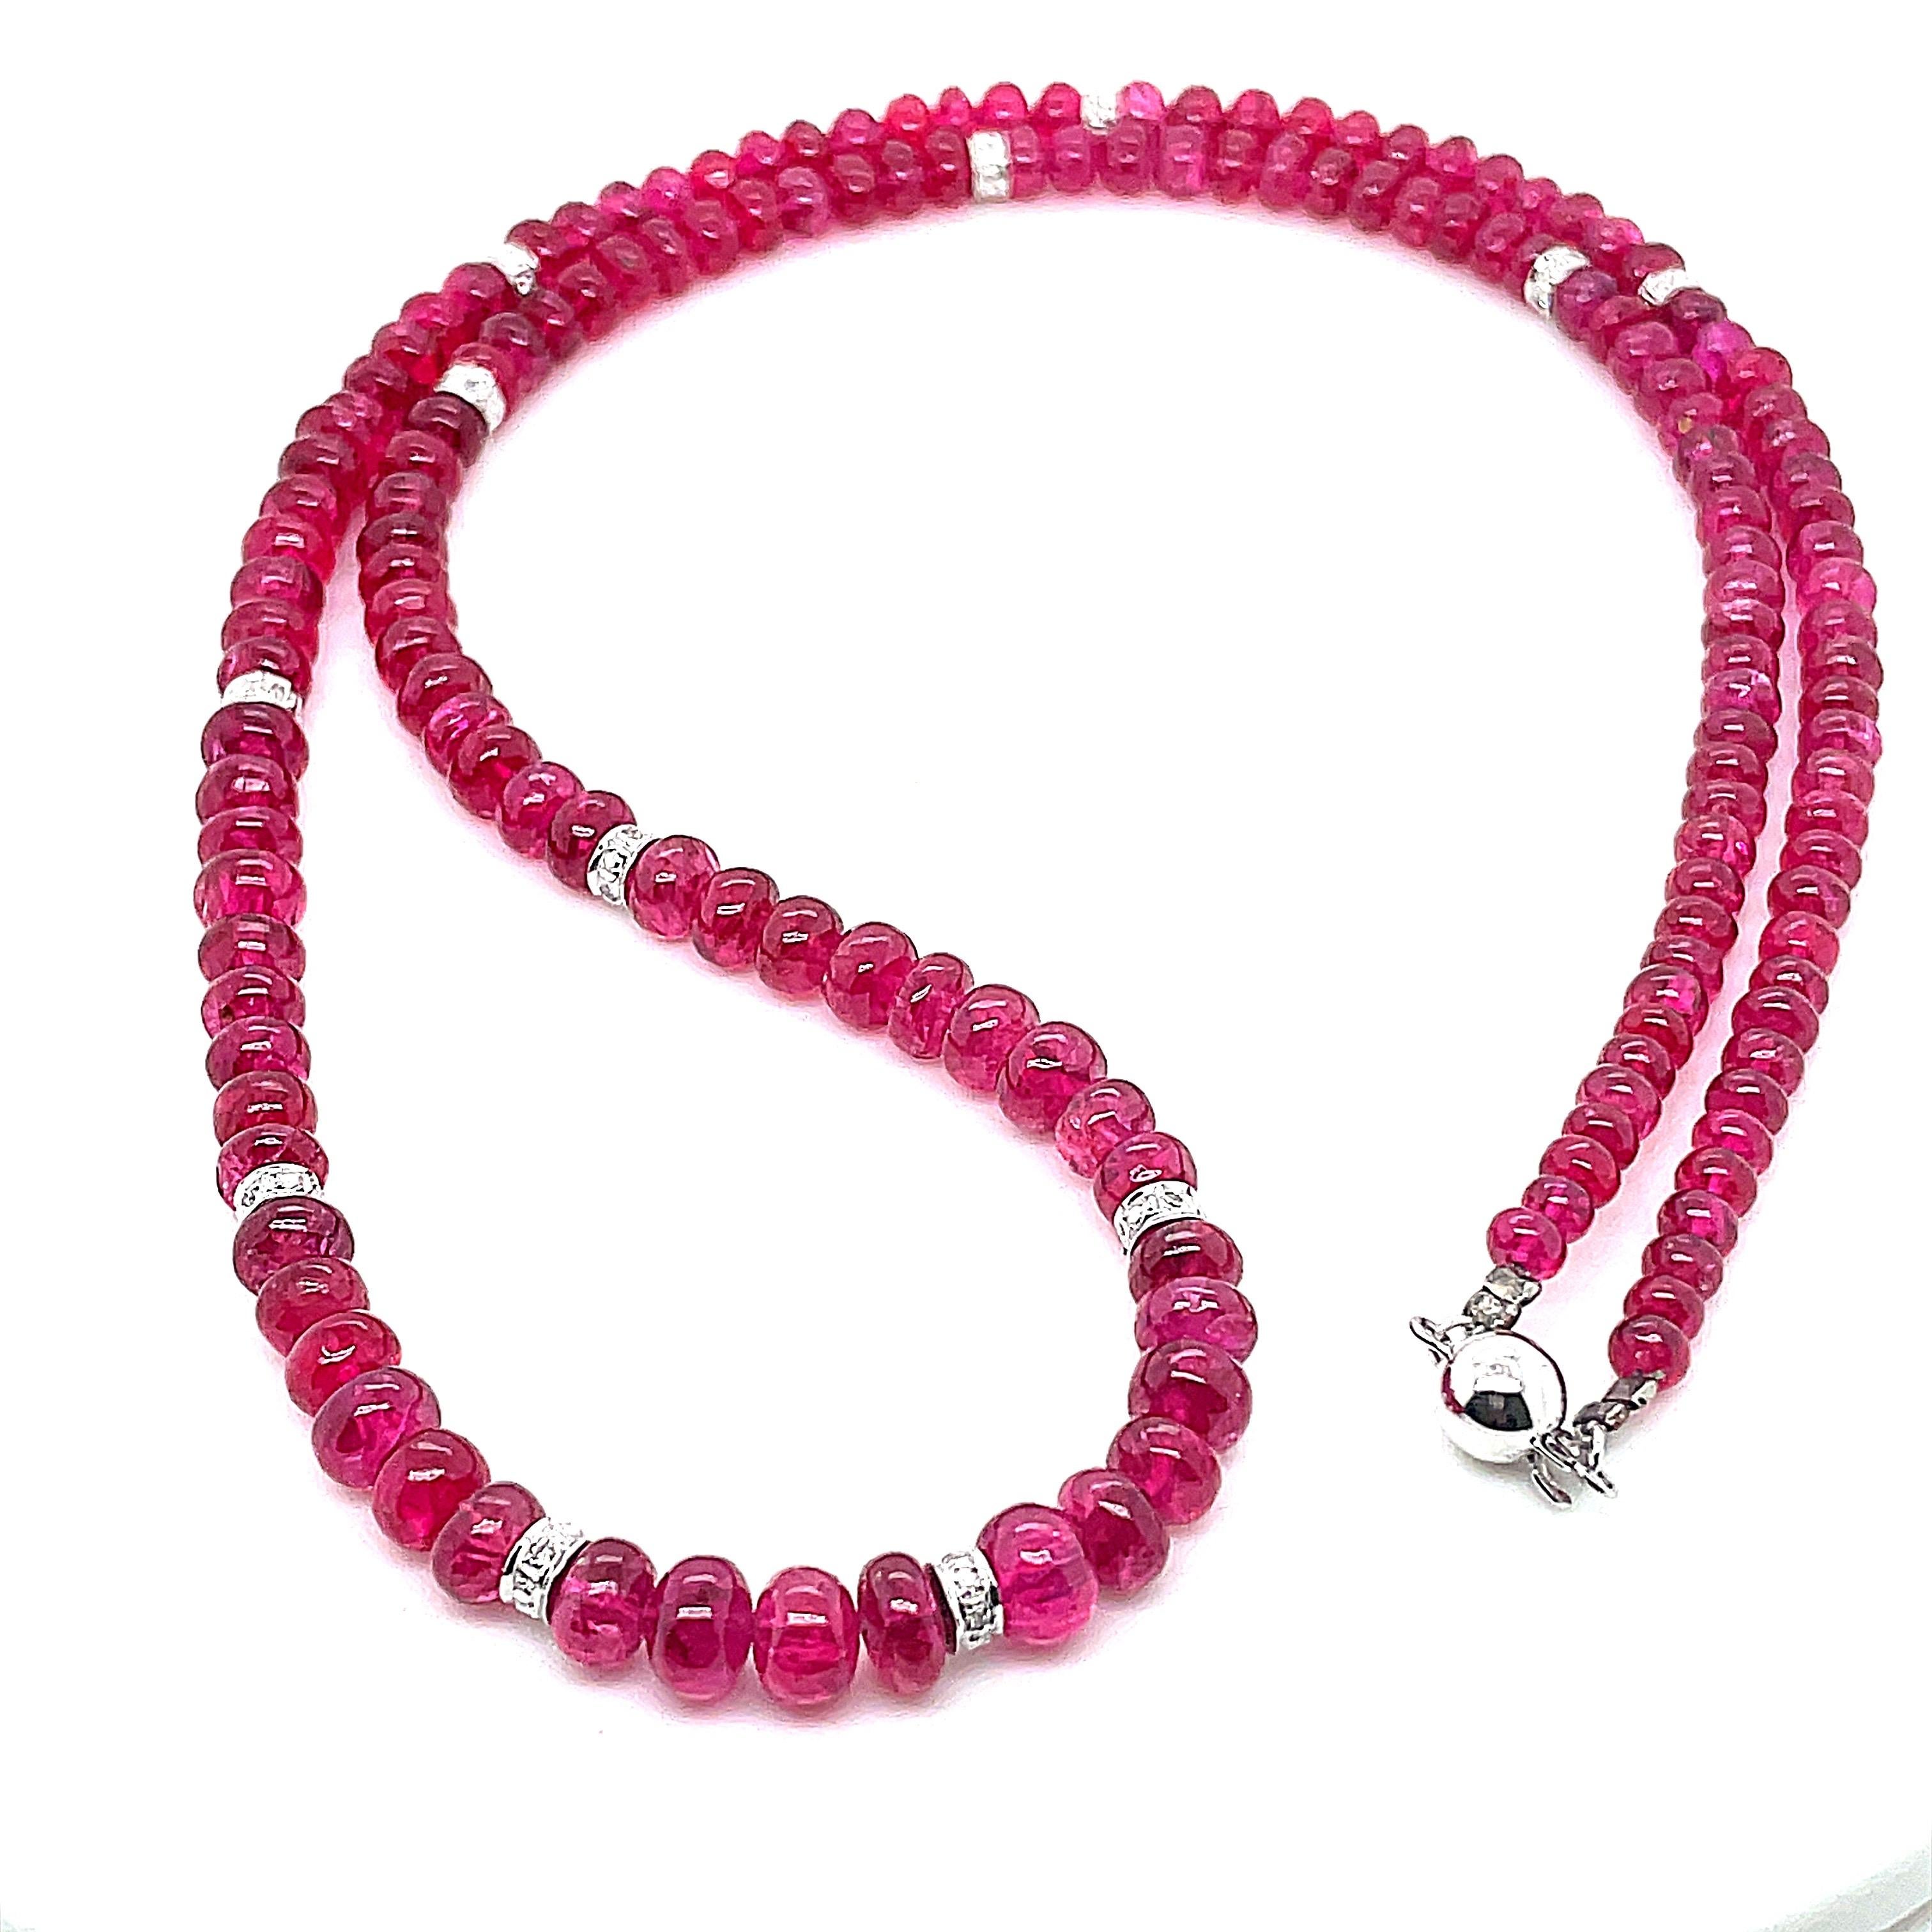 Draped in 122.48 carats of unheated spinel beads, this necklace is a celebration of natural allure. 

Each bead whispers tales of authenticity, as no heat treatments have altered their breathtaking hues.

Between these spinel beads, threads of white